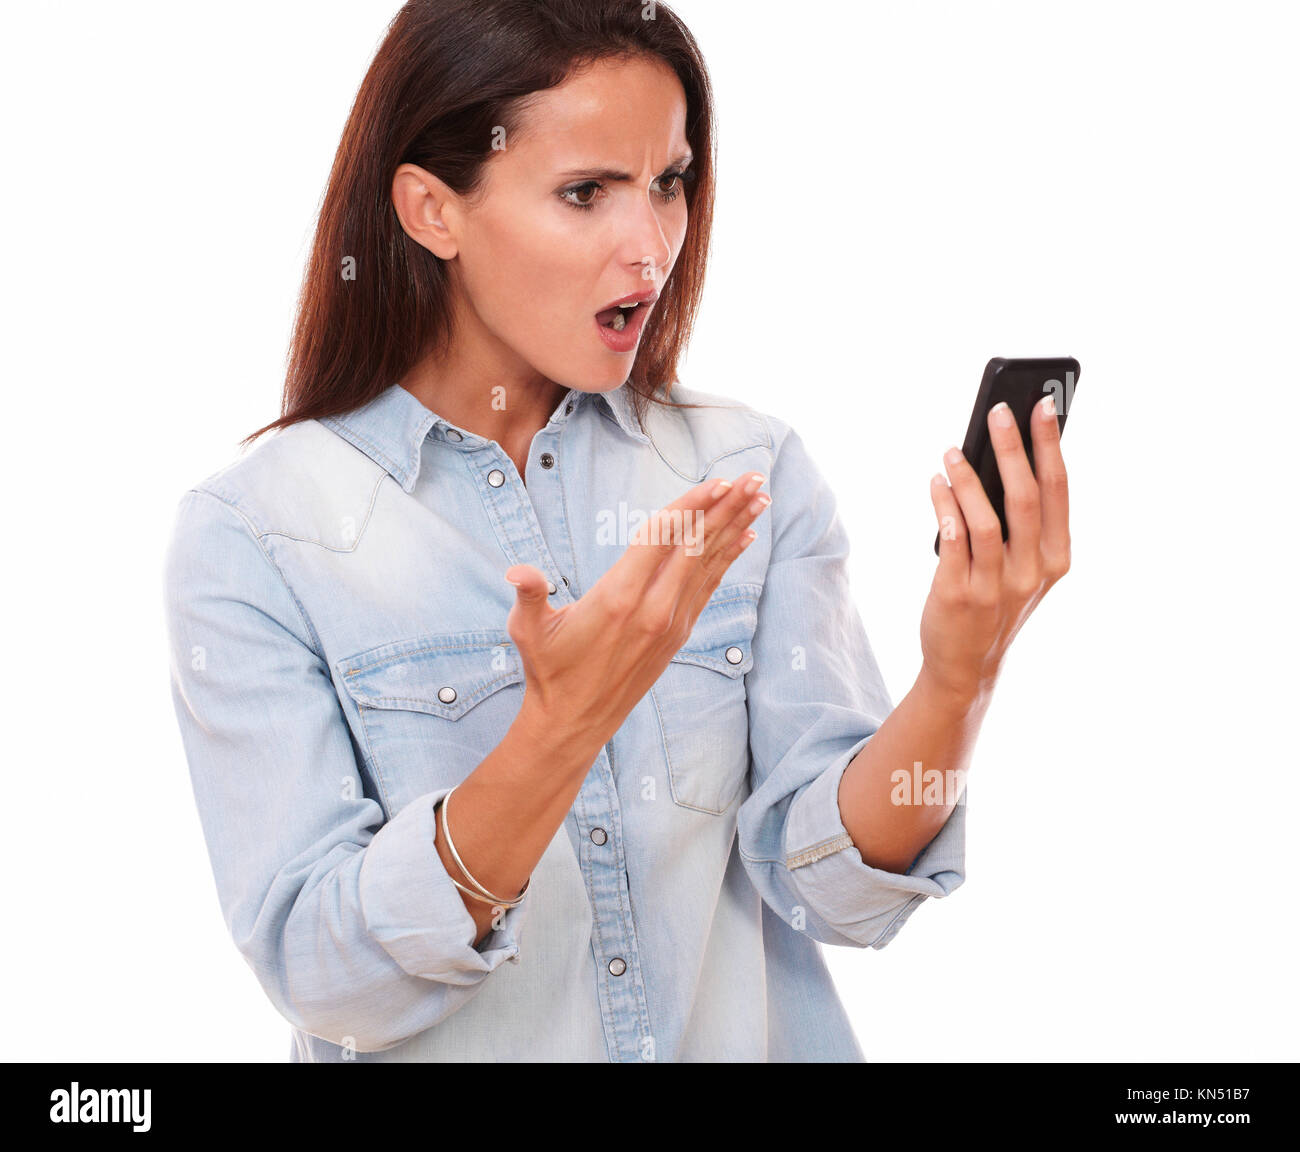 Portrait of angry adult female on blue blouse reading a message on her cell while screaming on isolated white bacckground. Stock Photo